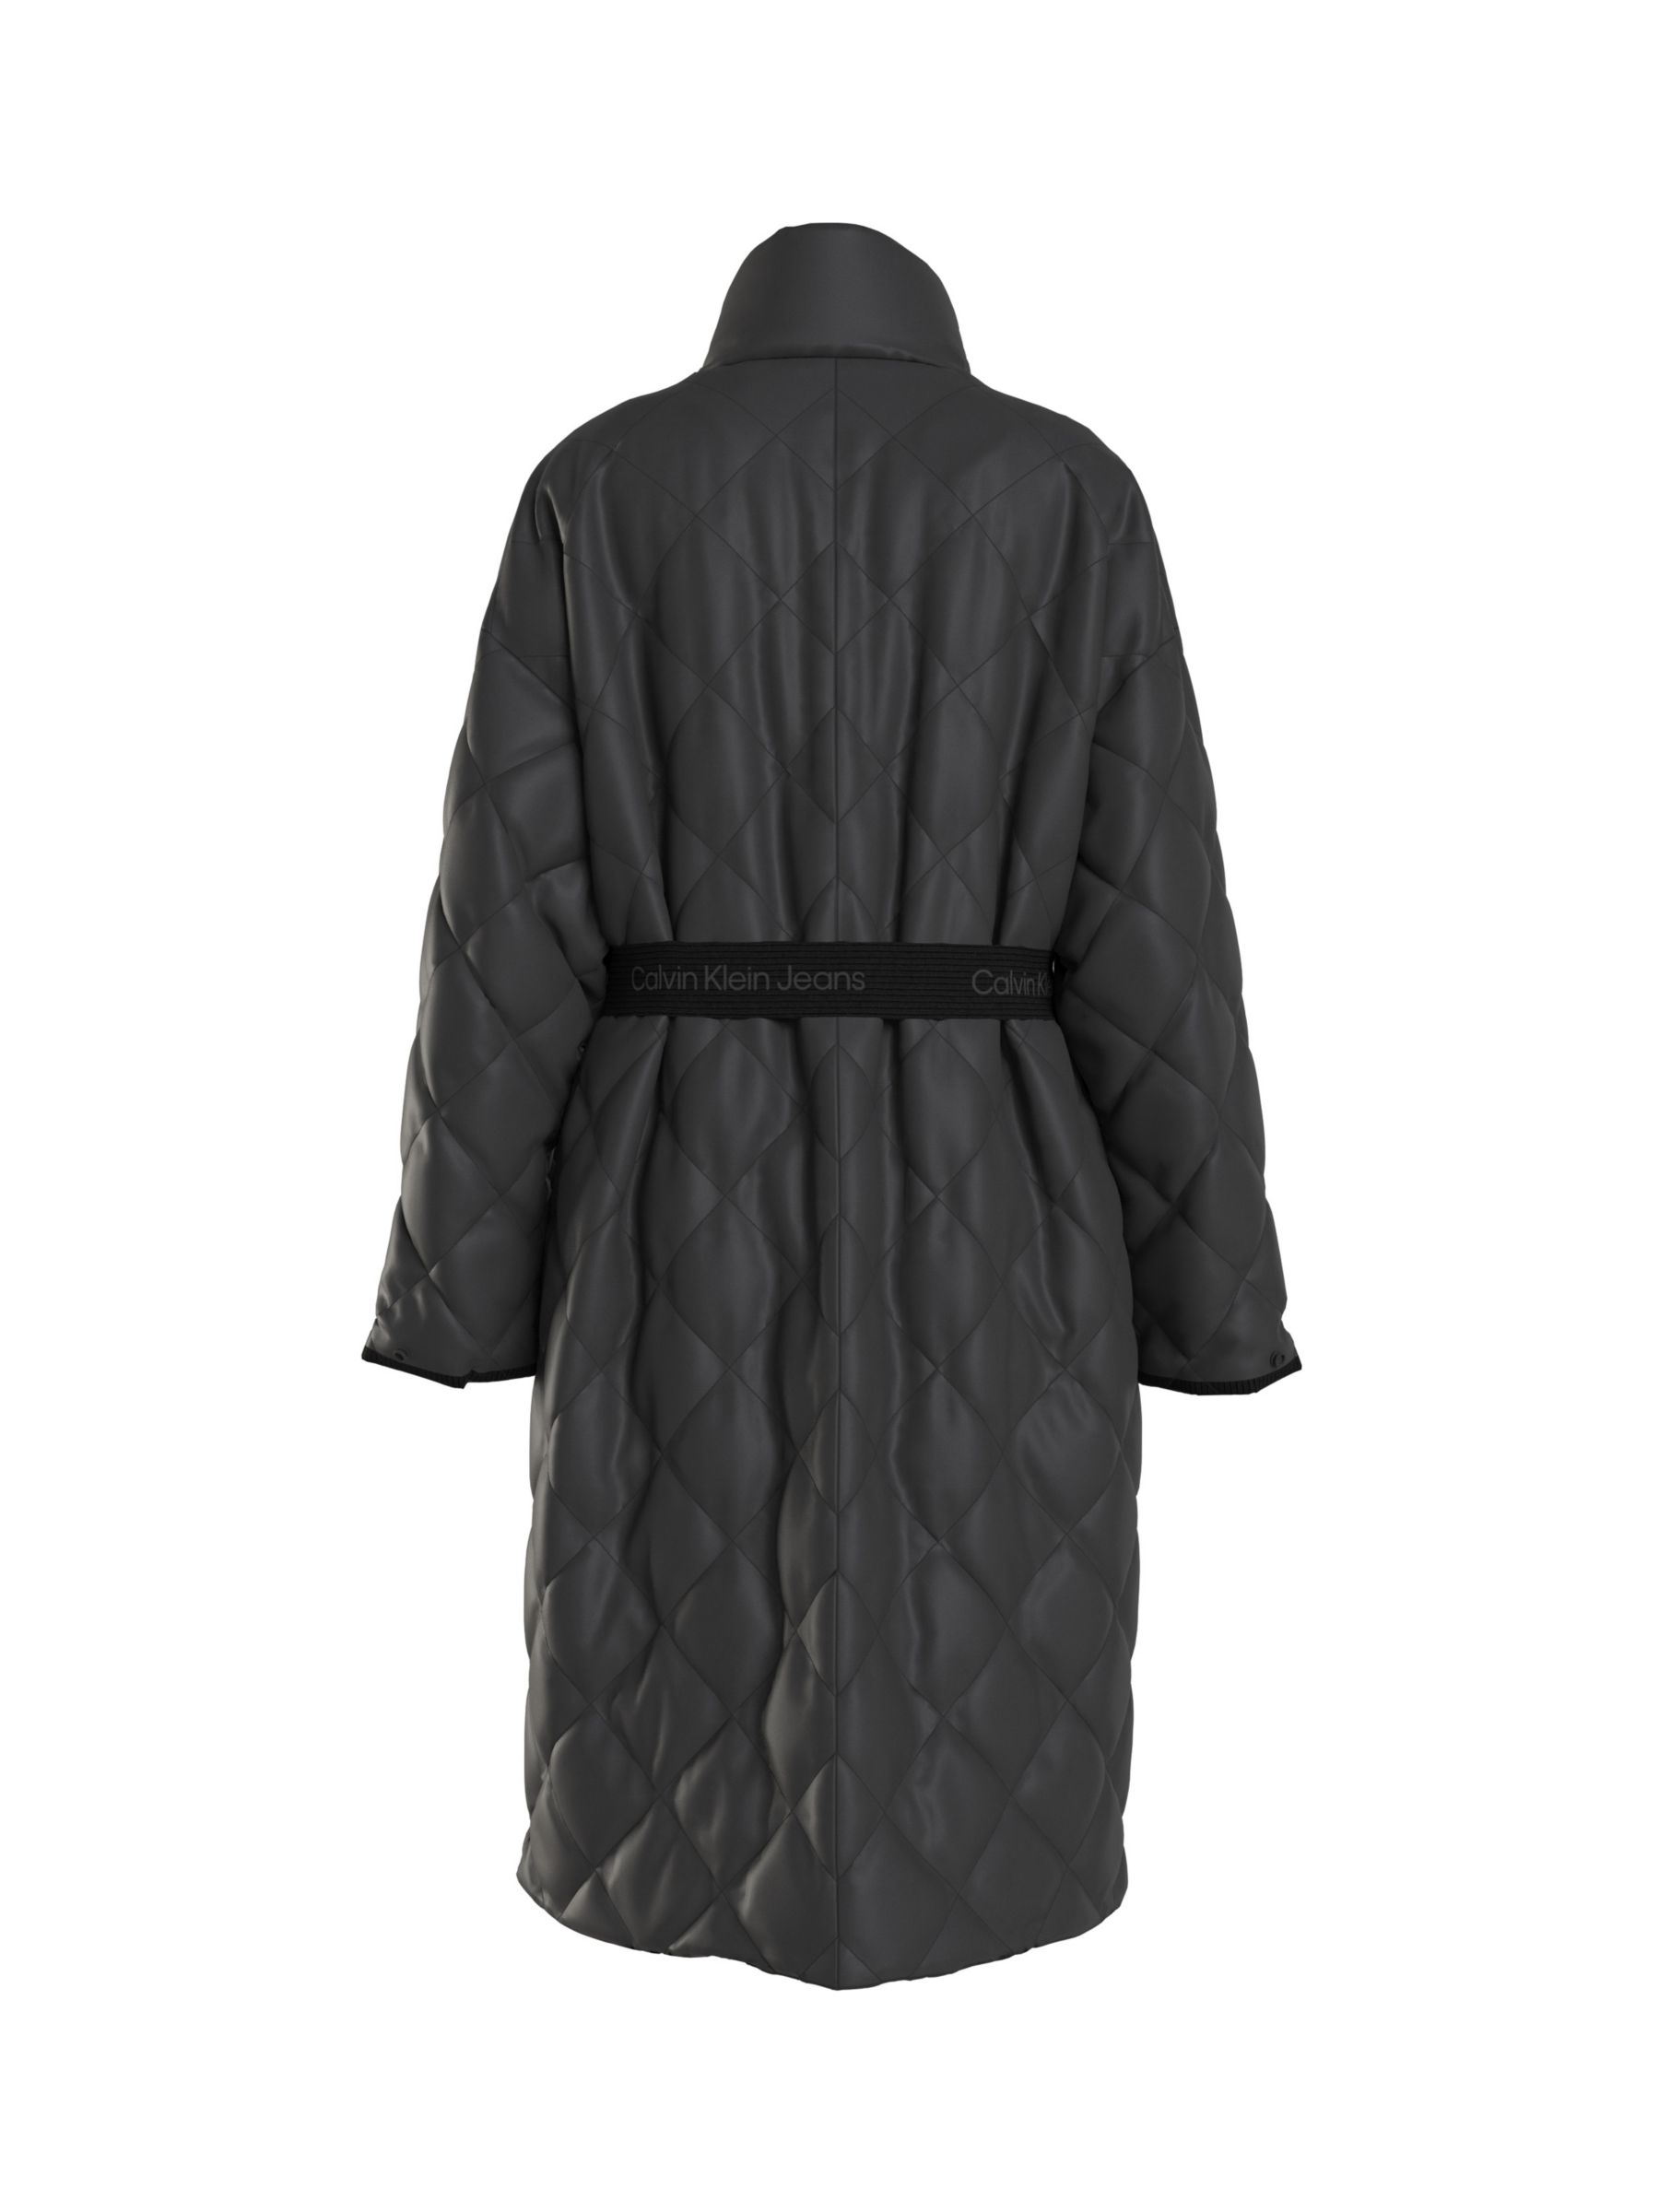 Calvin Klein Belted Quilted Coat, Black at John Lewis & Partners